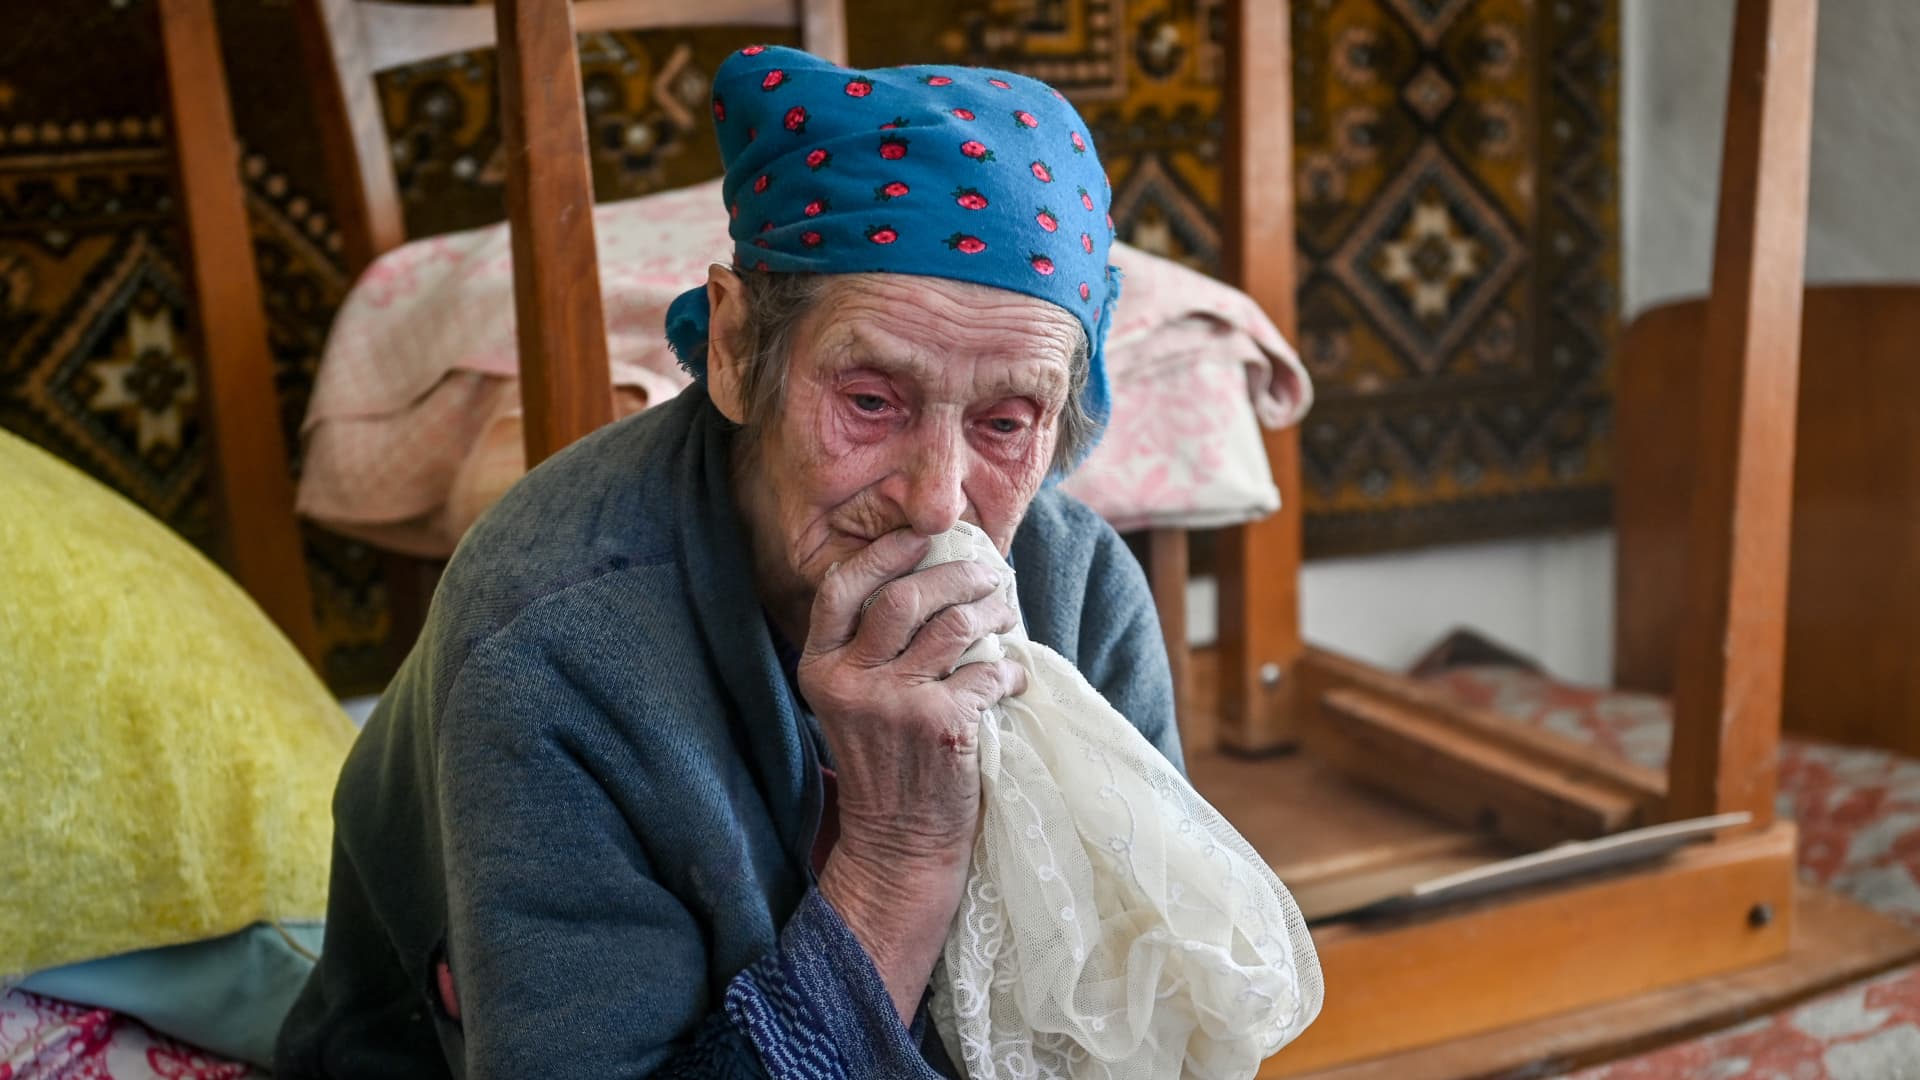 A Ukrainian woman cries in her house after the 18 missiles hit the civil settlements of Komyshuvakha, Zaporizhzhia Oblast, Ukraine on May 12, 2022.